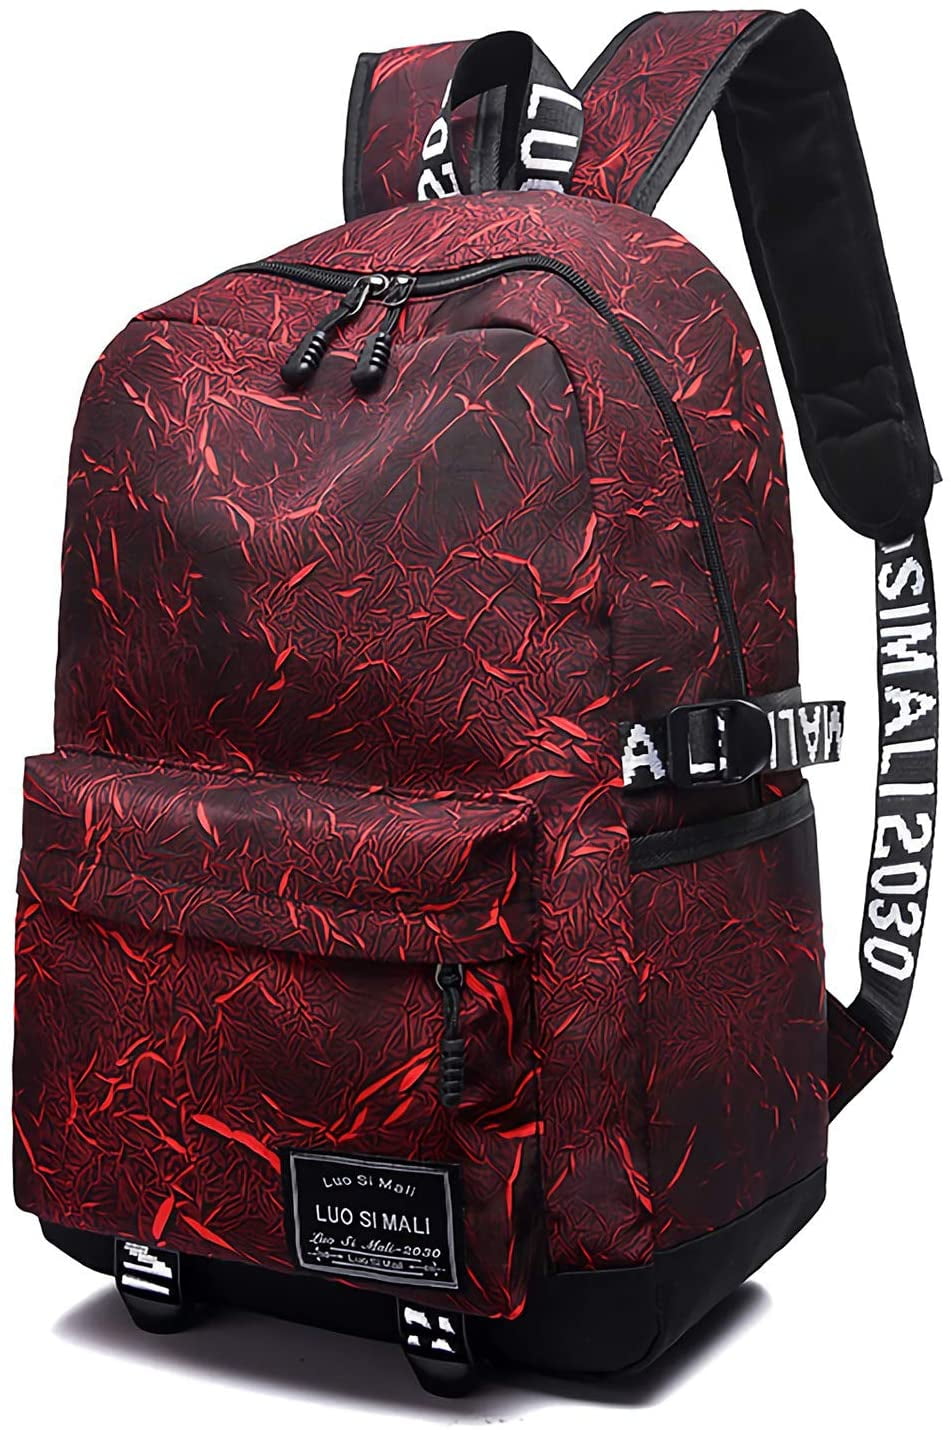 Unisex PU Leather Backpack Merry Christmas Tree Gifts Red Print Womens Casual Daypack Mens Travel Sports Bag Boys College Bookbag